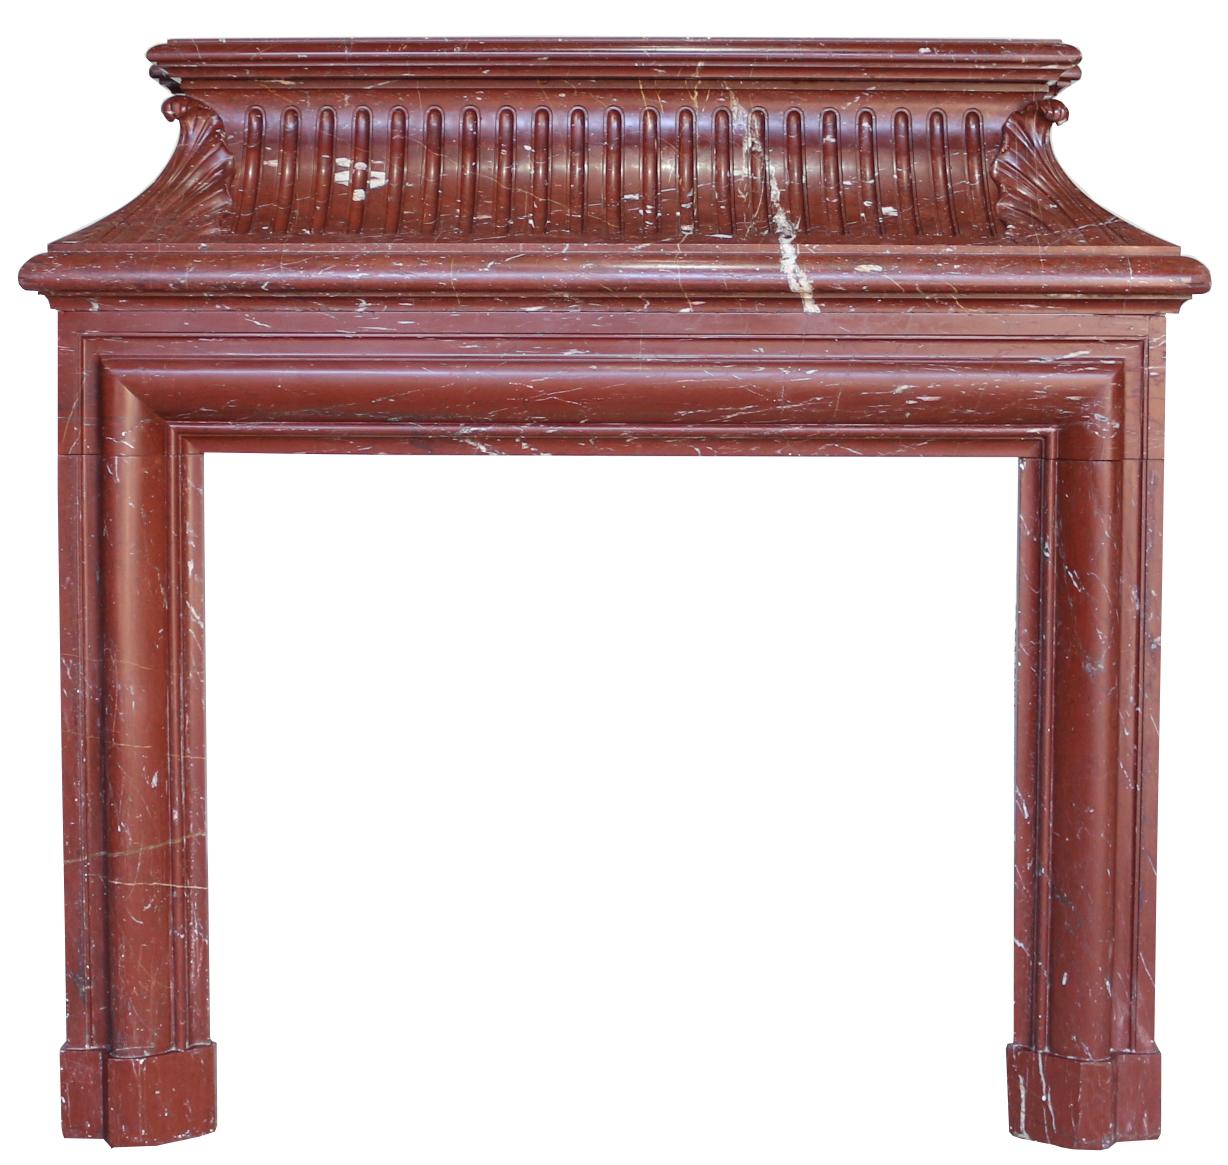 A tall, Louis XIV ‘Bolection de Versailles’ antique chimney-piece or fire place in richly coloured cherry red Griotte marble. The concave fluted frieze with scaled corner foliage decoration. The side pieces feature decorative circular hinged brass